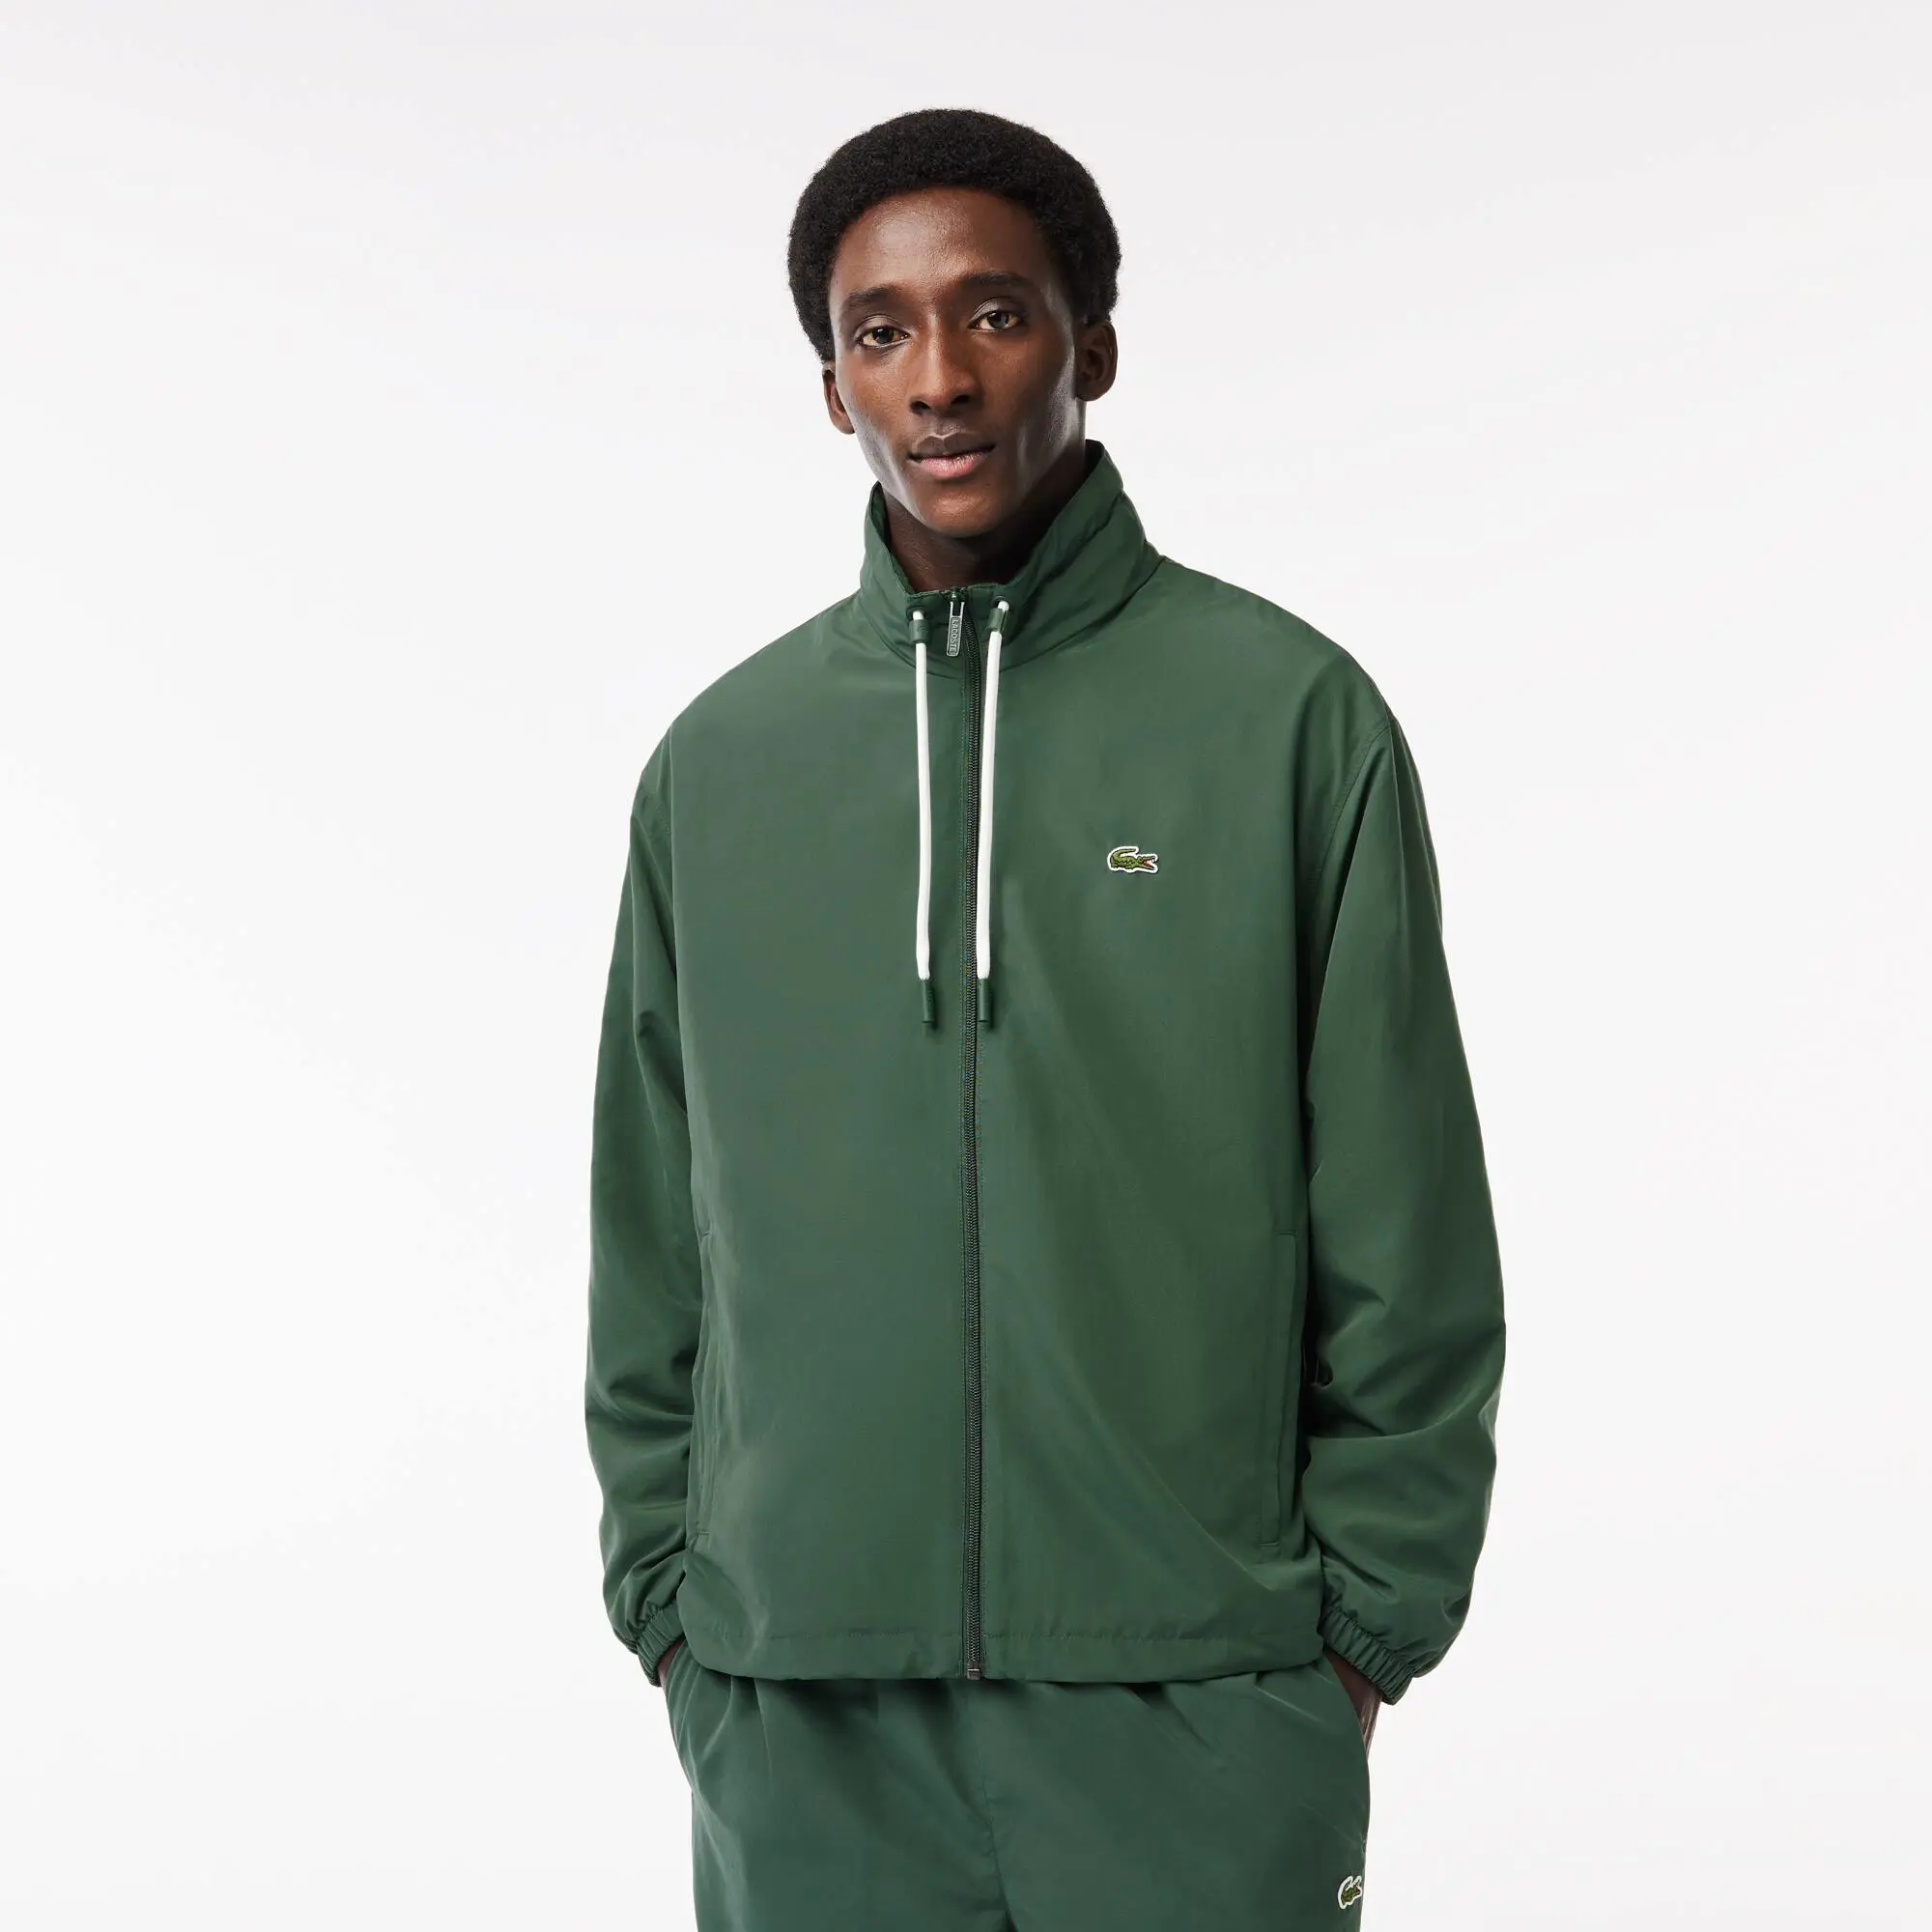 Lacoste Short Water-resistant Sportsuit Jacket with Removable Hood. 1